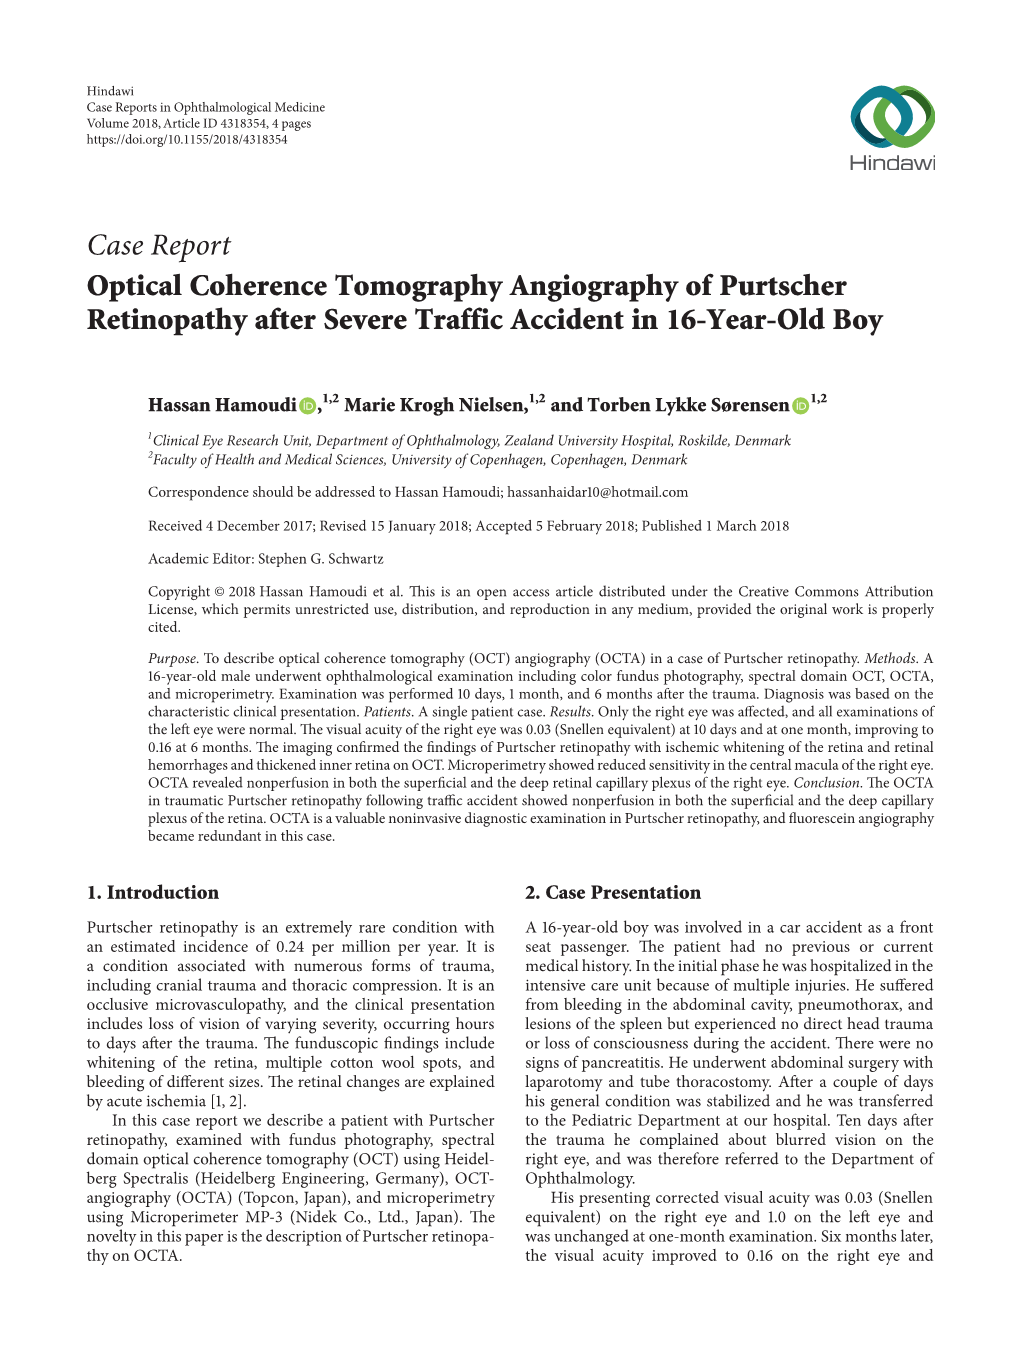 Optical Coherence Tomography Angiography of Purtscher Retinopathy After Severe Traffic Accident in 16-Year-Old Boy